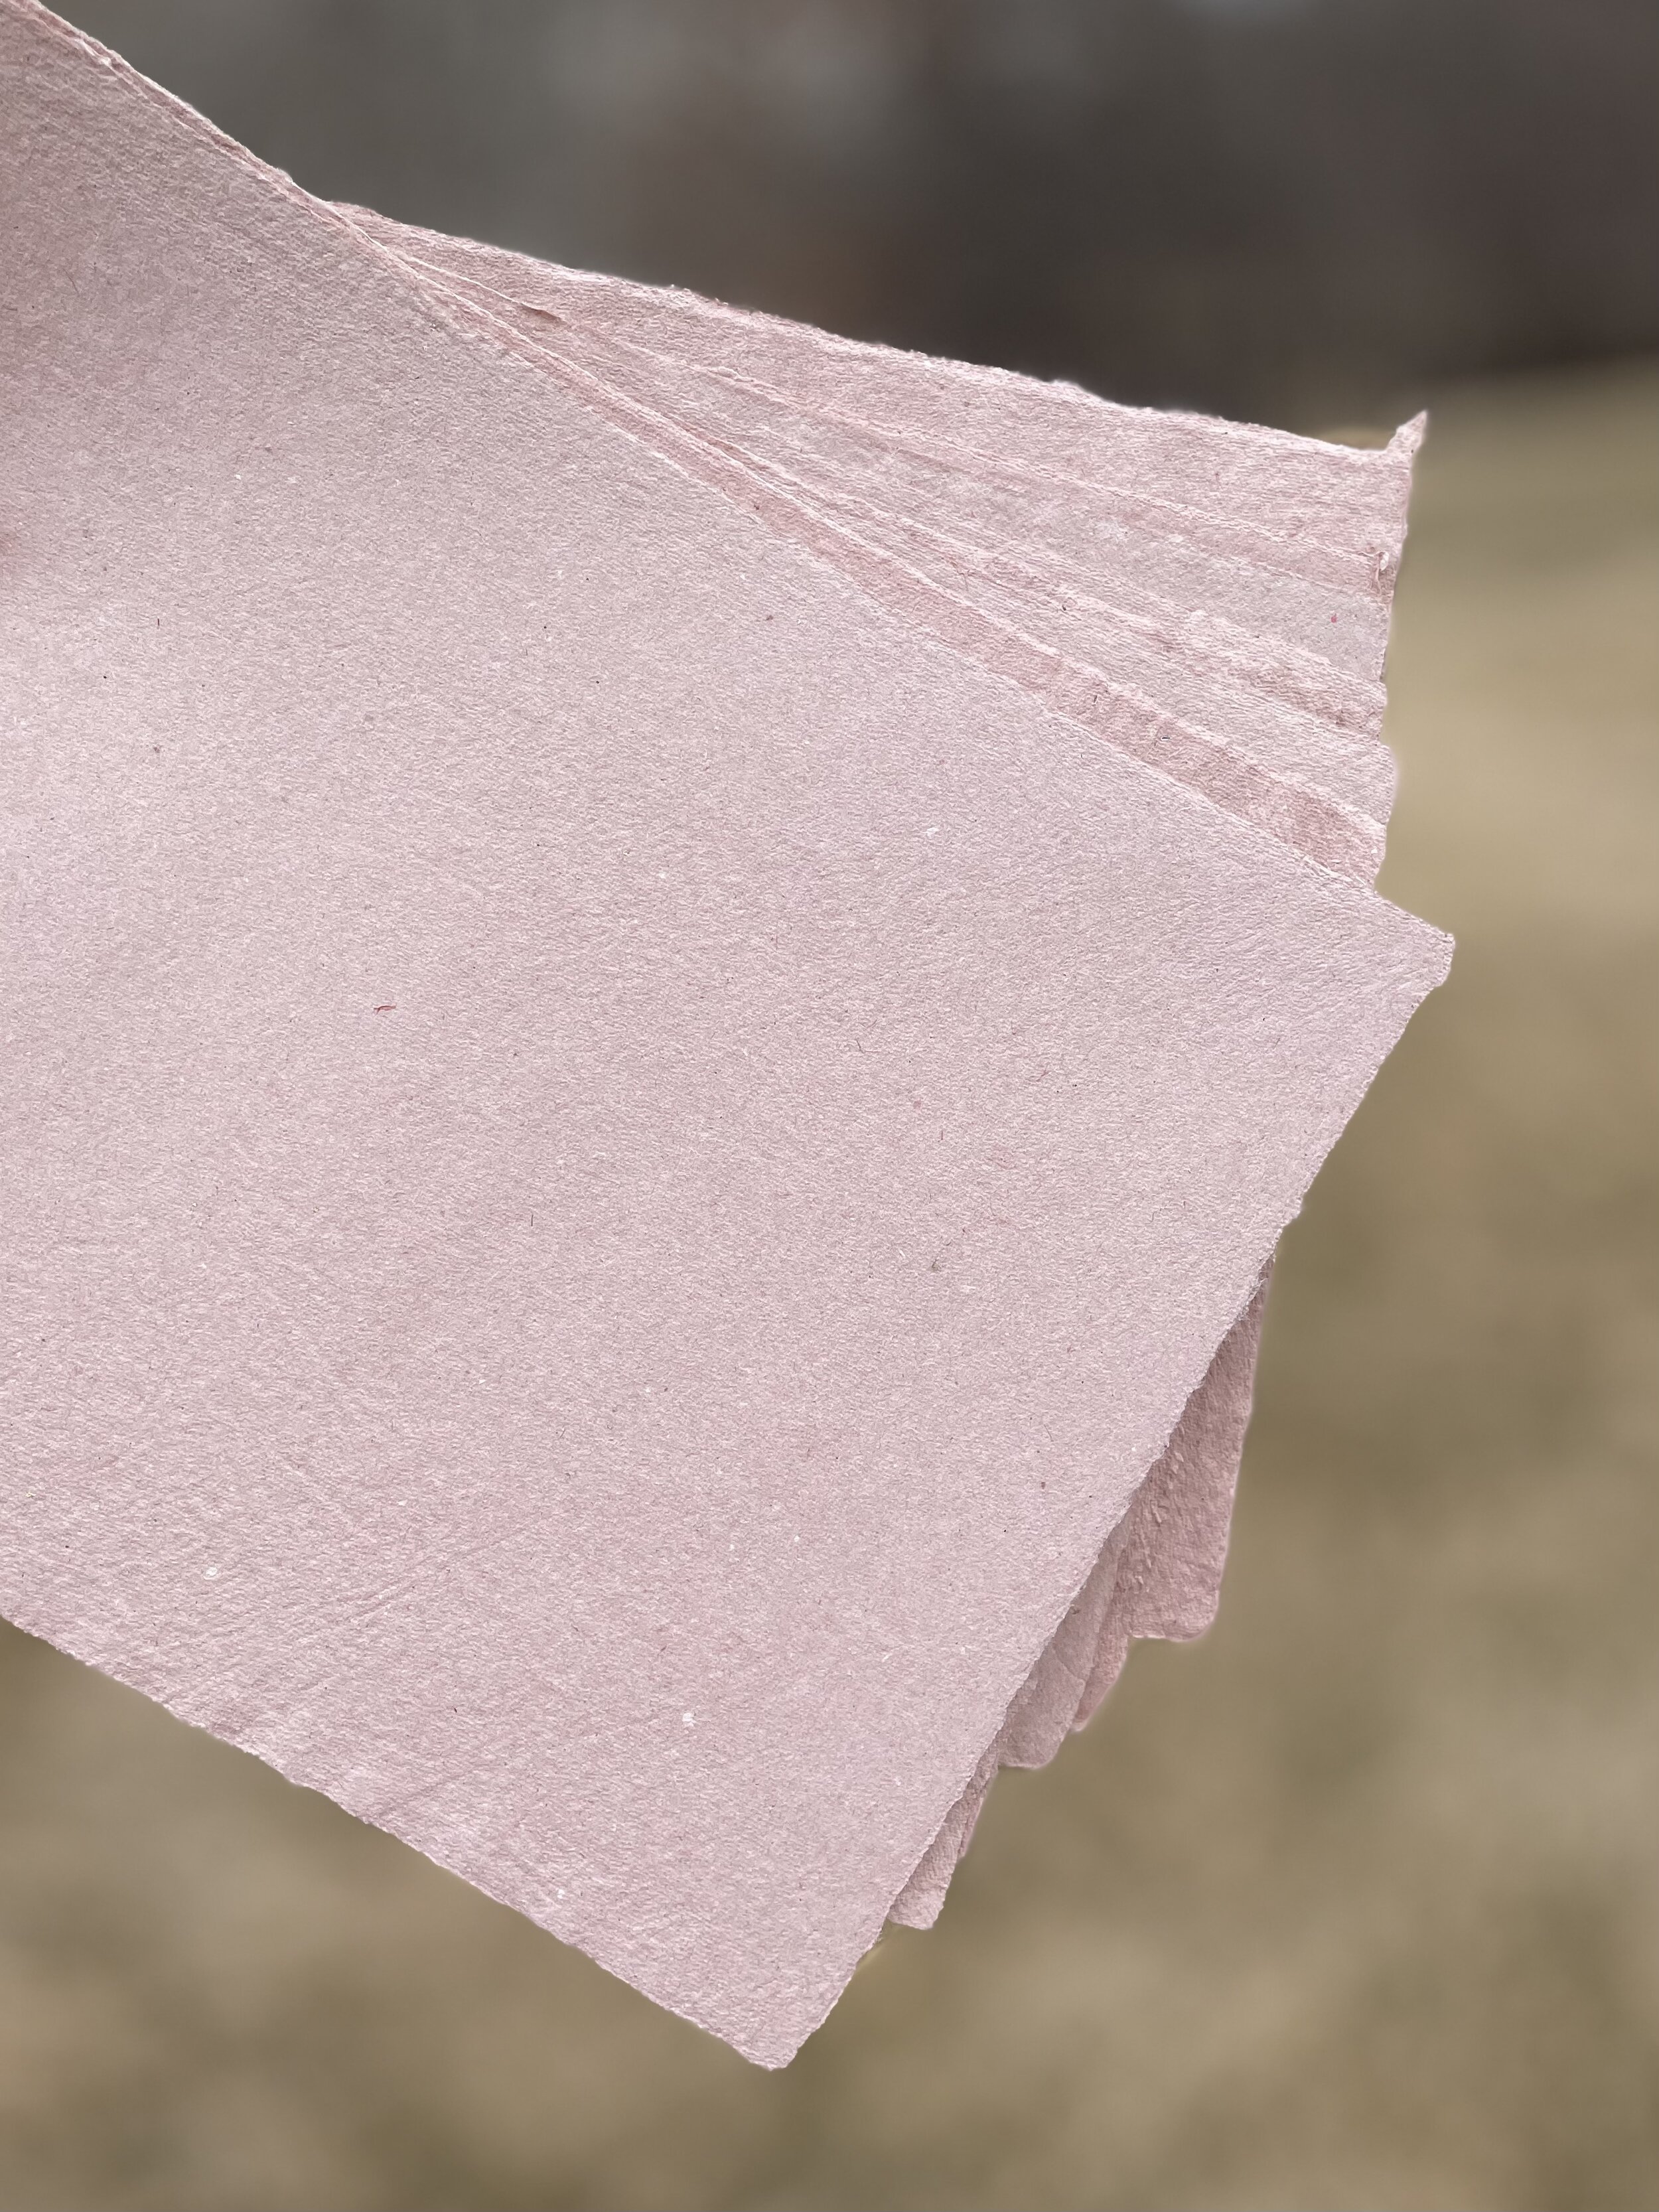 Chasing Texture on Handmade Paper — Miner Book Co.